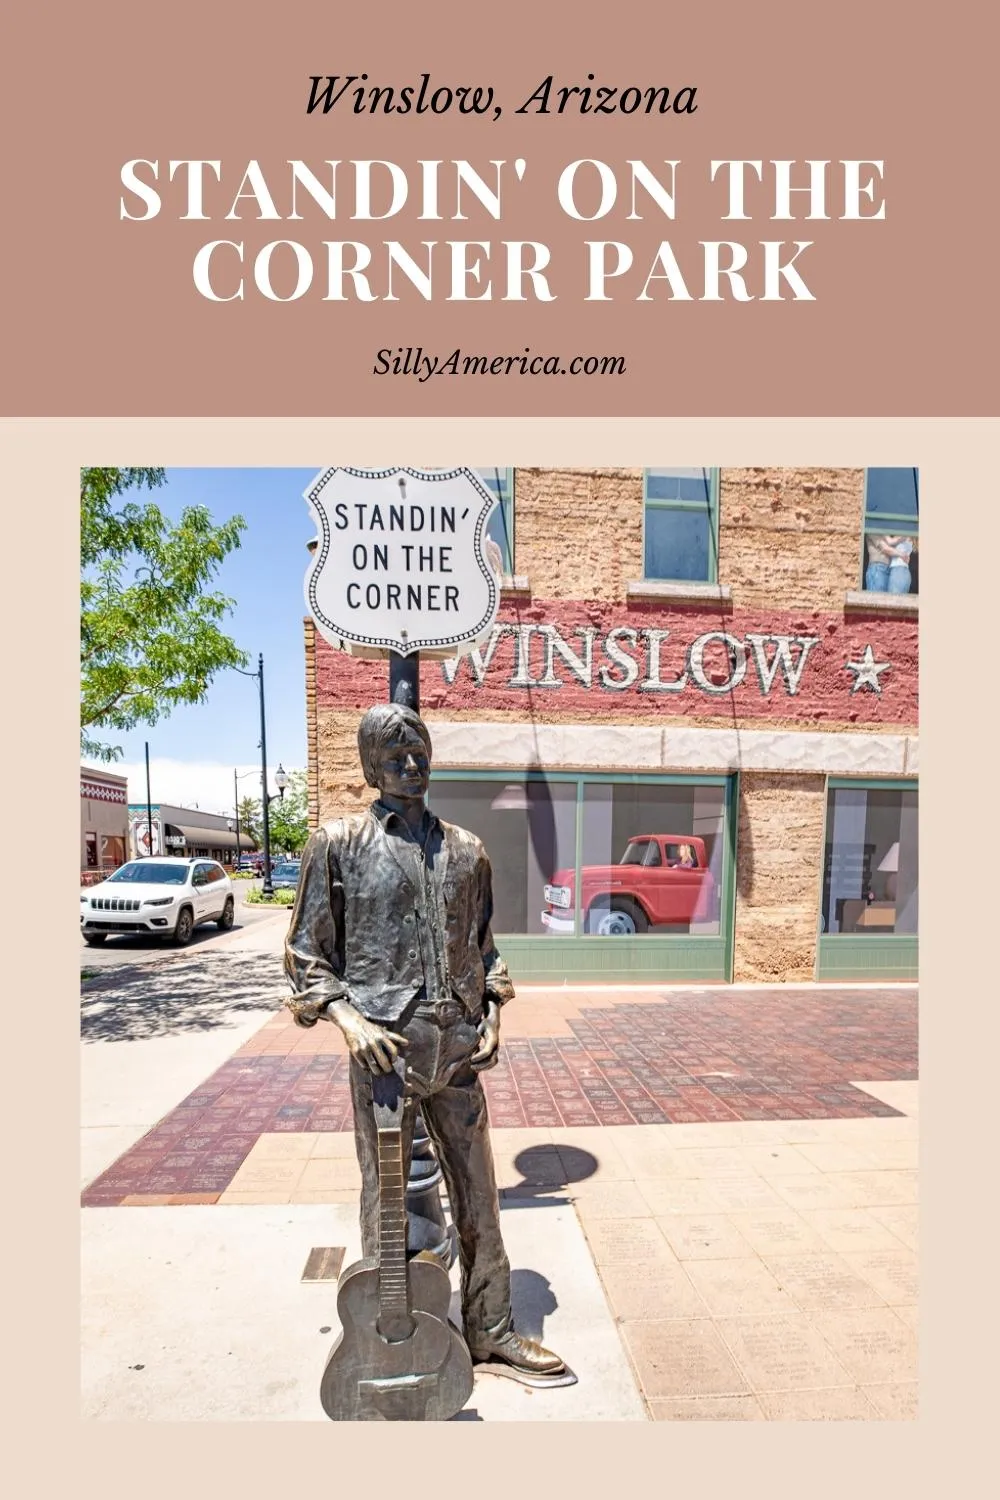 If you find yourself standing on a corner in Winslow, Arizona you can’t miss this Route 66 roadside attraction. Take it easy and visit Standin' on The Corner Park. It’s such a fine sight to see. Visit this fun Route 66 roadside attraction on your Arizona road trip - add it to your travel itinerary and bucket list! The park commemorates the song “Take it Easy,” a hit song that was made popular by the Eagles in 1972. #Route66 #Arizona #RoadTrip #Route66RoadTrip #ArizonaRoadTrip